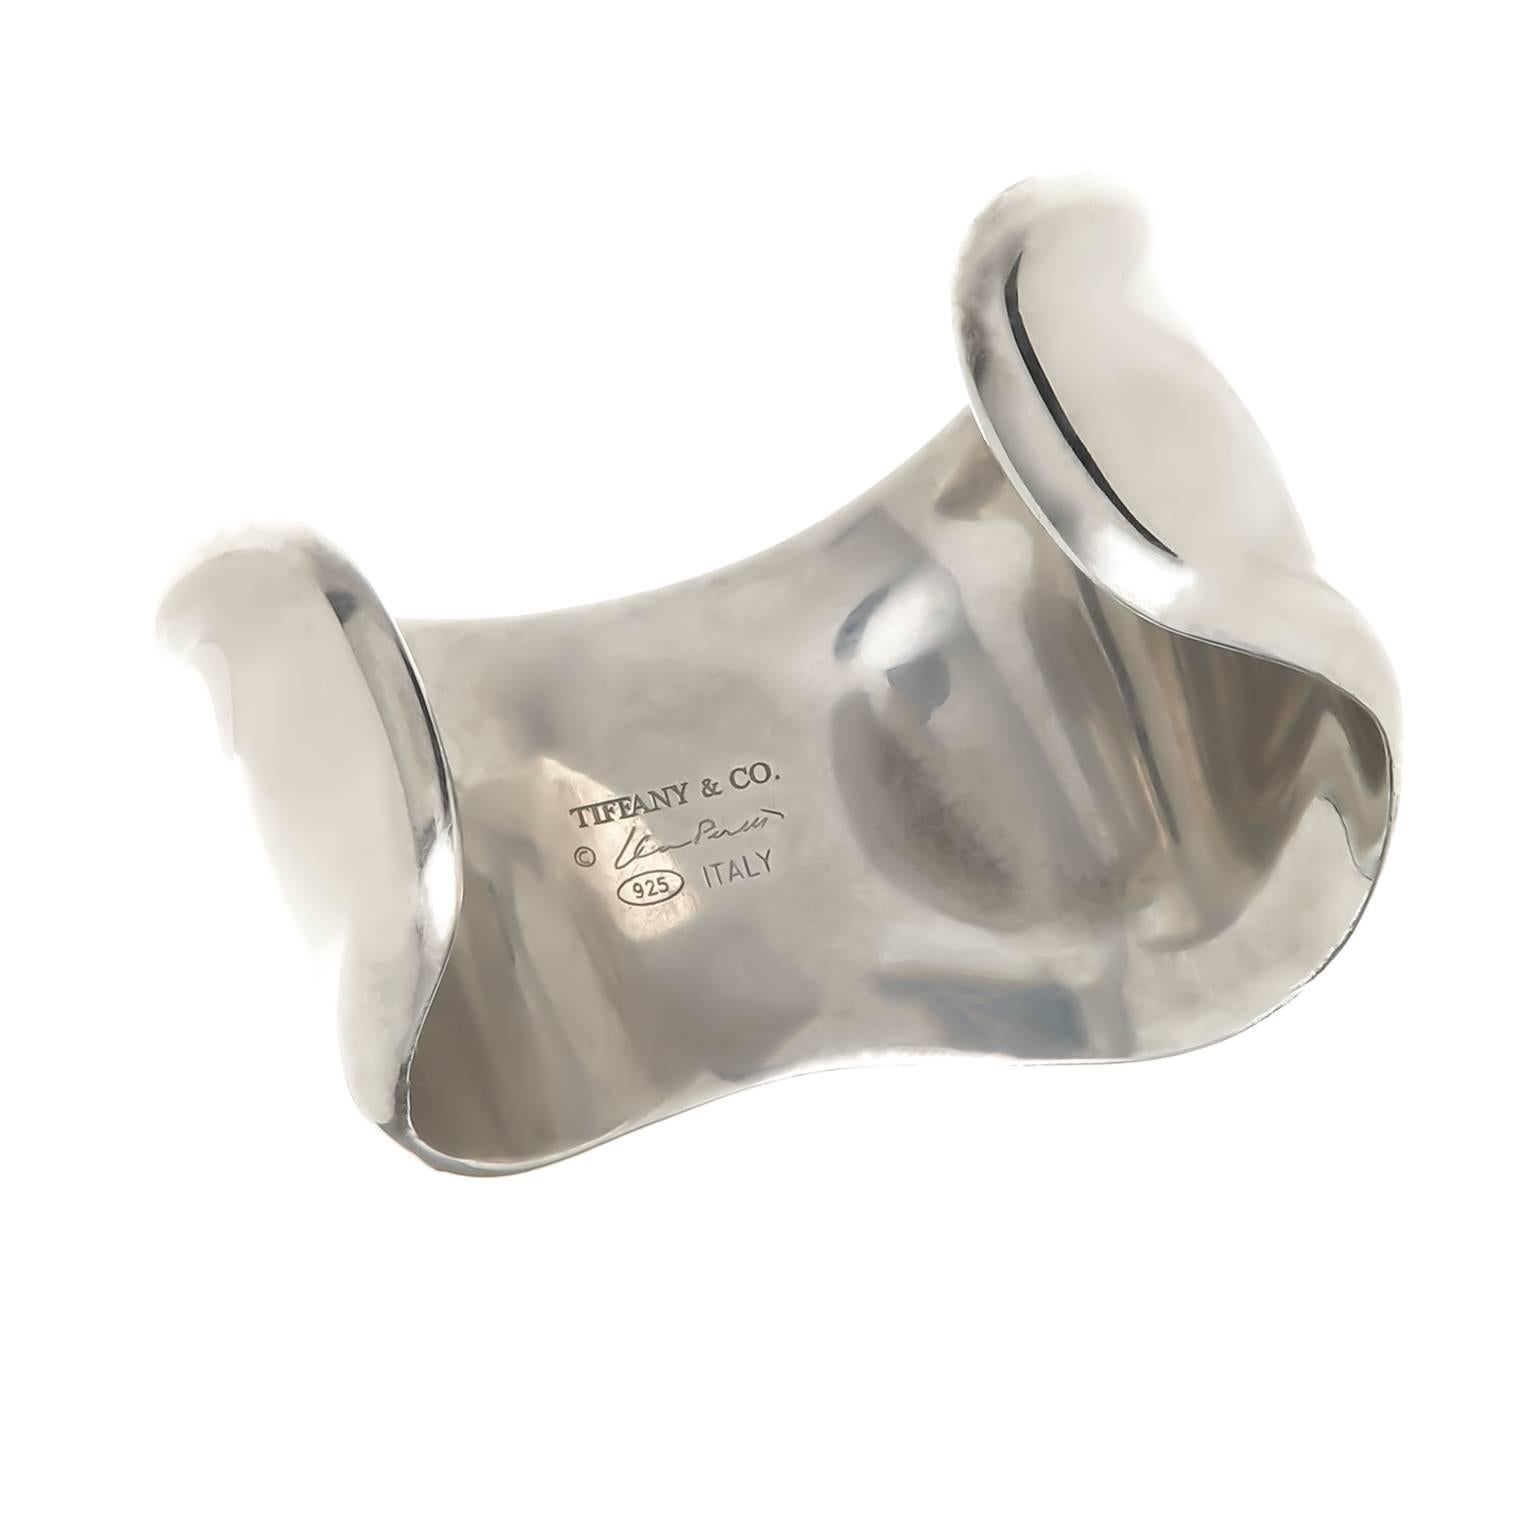 Circa 1990s Elsa Peretti for Tiffany & Company sterling silver Bone Cuff Bracelet, measuring 2 1/8 inch wide with a 1 inch opening.